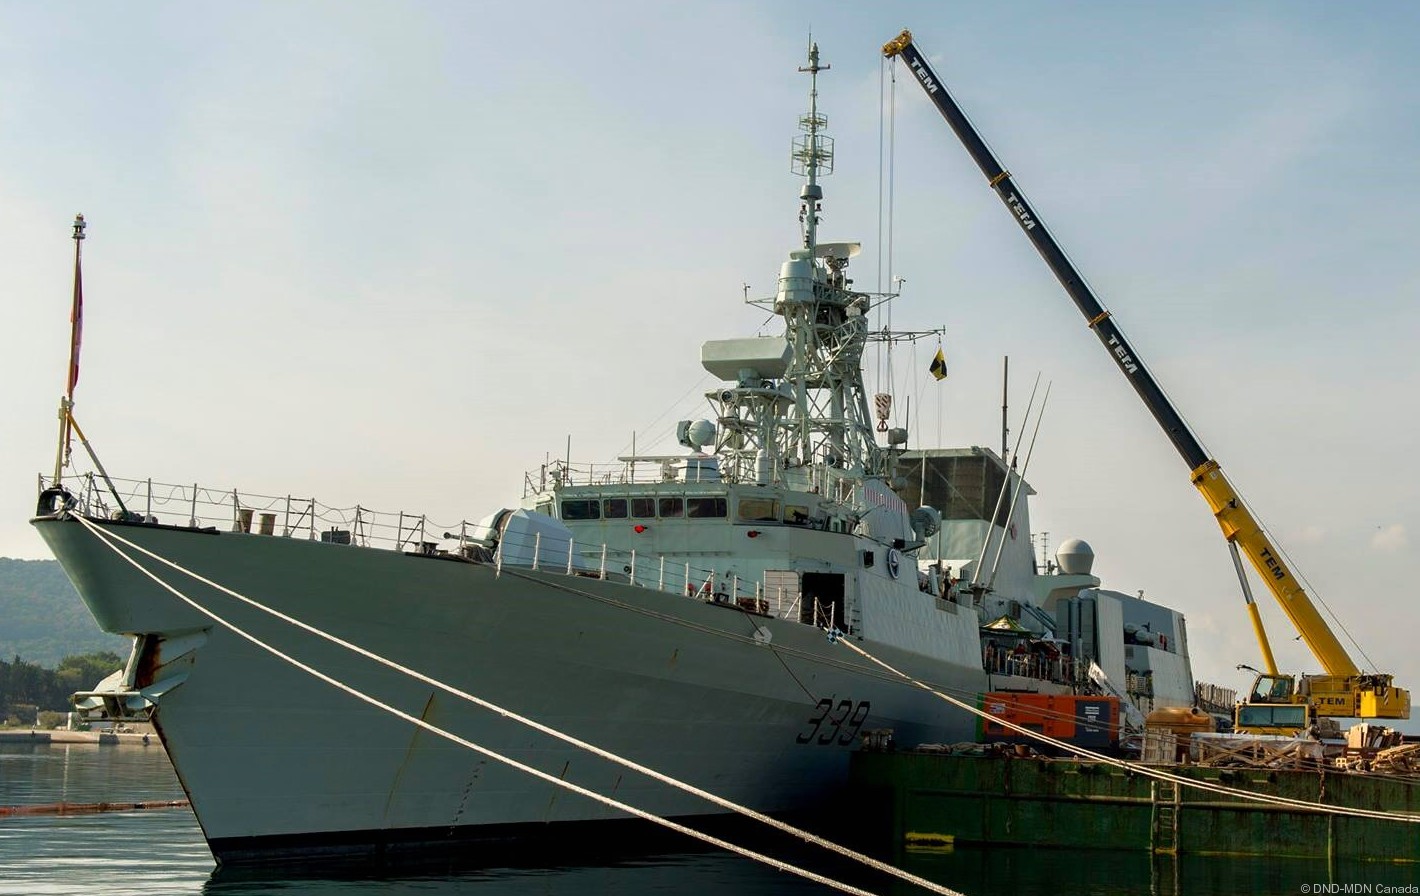 ffh-339 hmcs charlottetown halifax class helicopter patrol frigate ncsm royal canadian navy 15